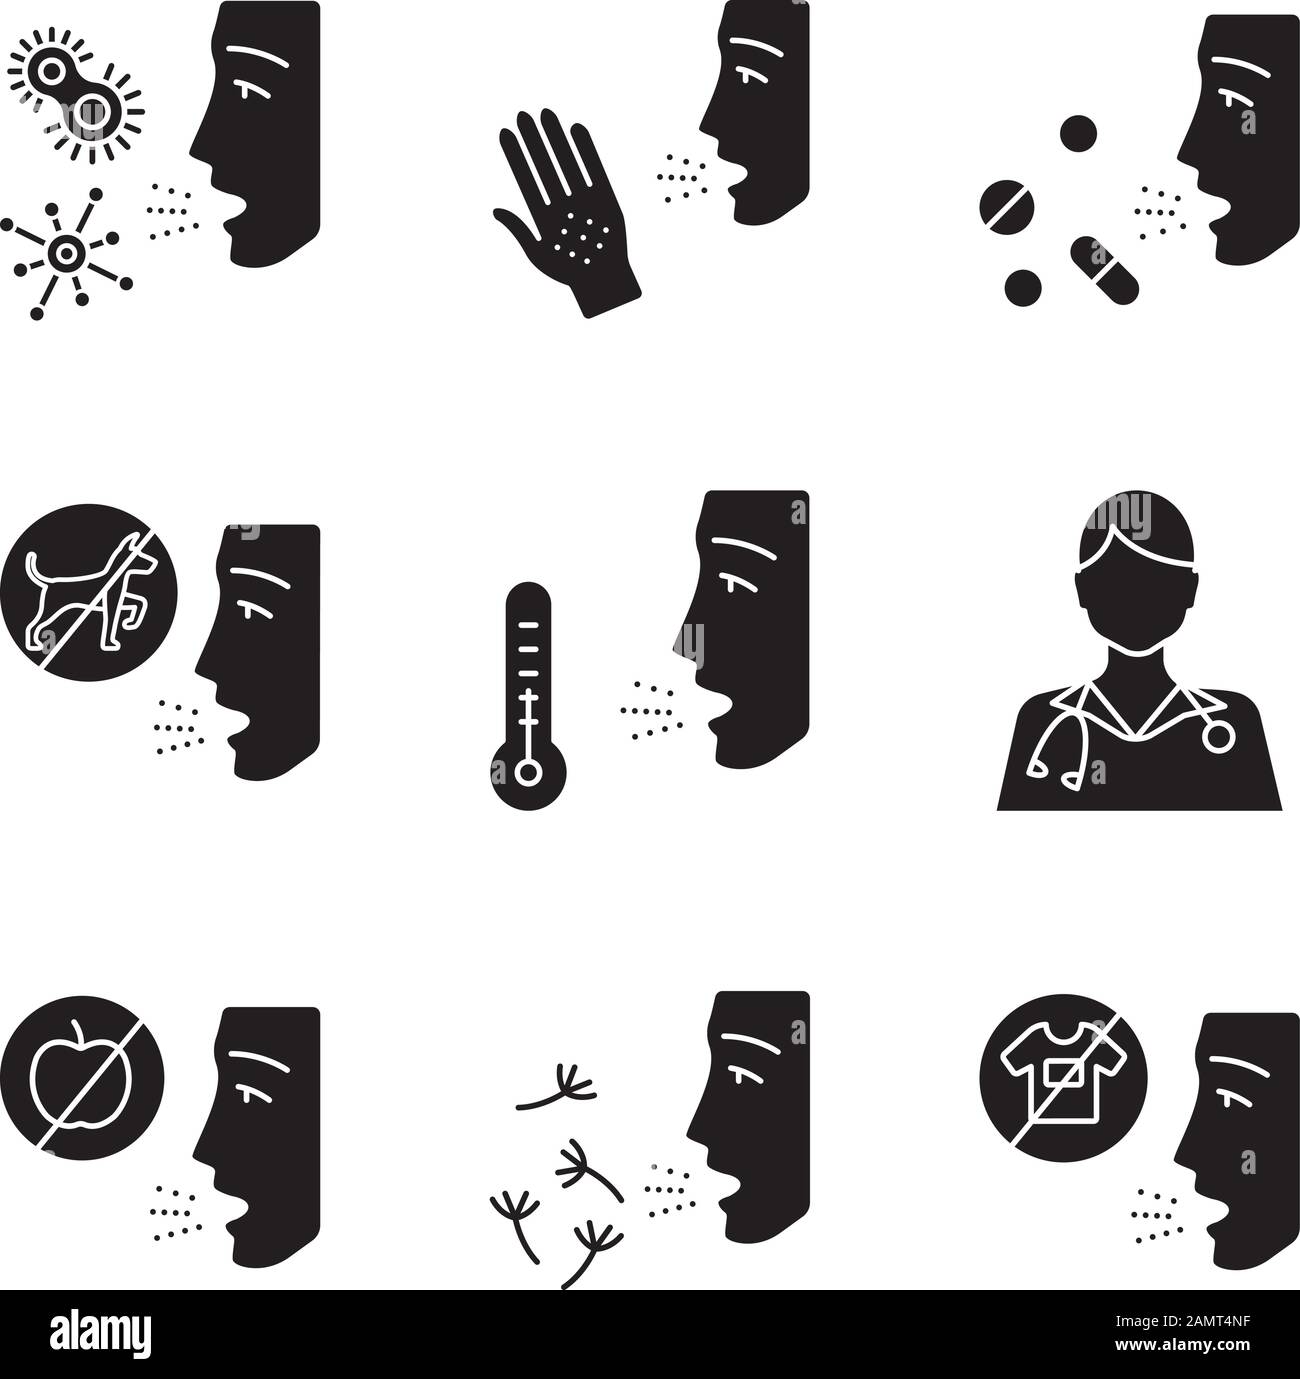 Allergies glyph icons set. Contact, food, respiratory diseases. Allergen sources. Diagnosis and medication. Hypersensitivity of immune system. Silhoue Stock Vector